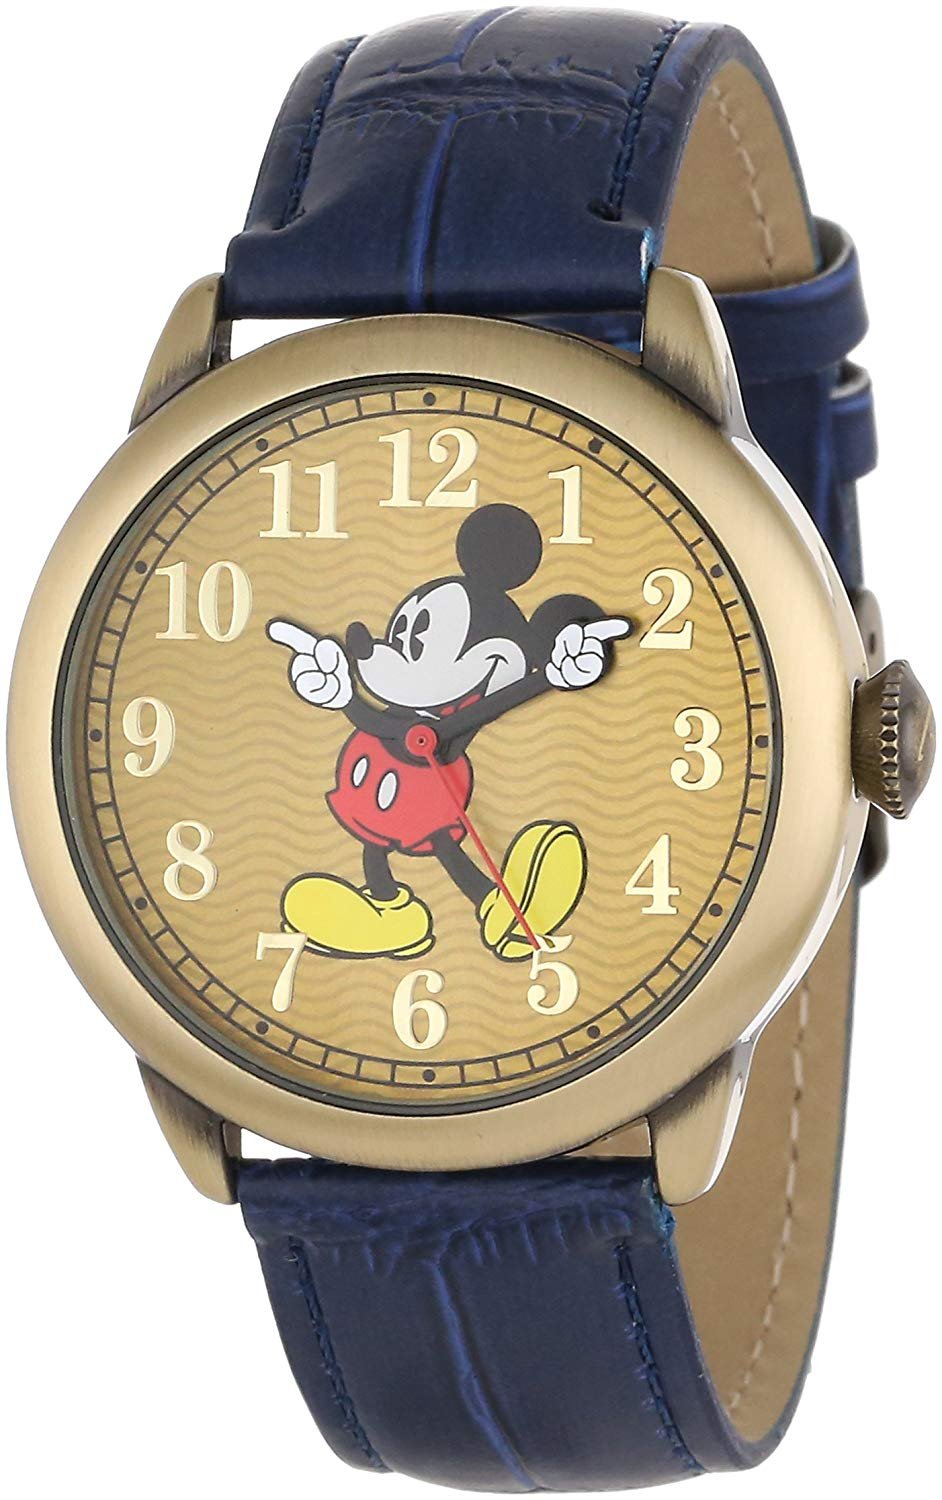 Model: Classic Style Disney Mickey Mouse Watch in Gold with Navy Strap